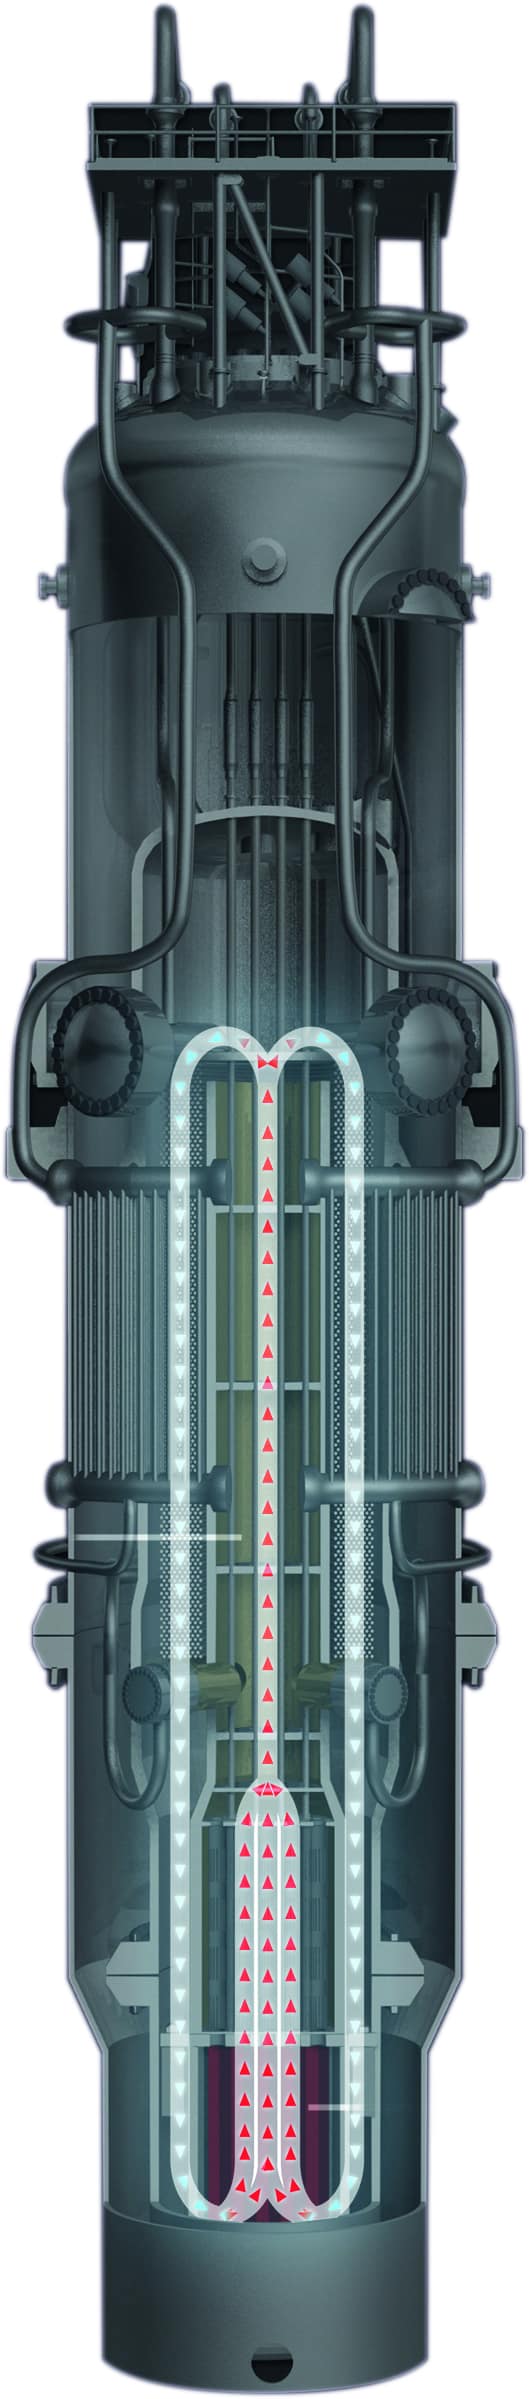 The NuScale SMR design, with the 9.5tonne reactor head husing the cotrol system and coolant access